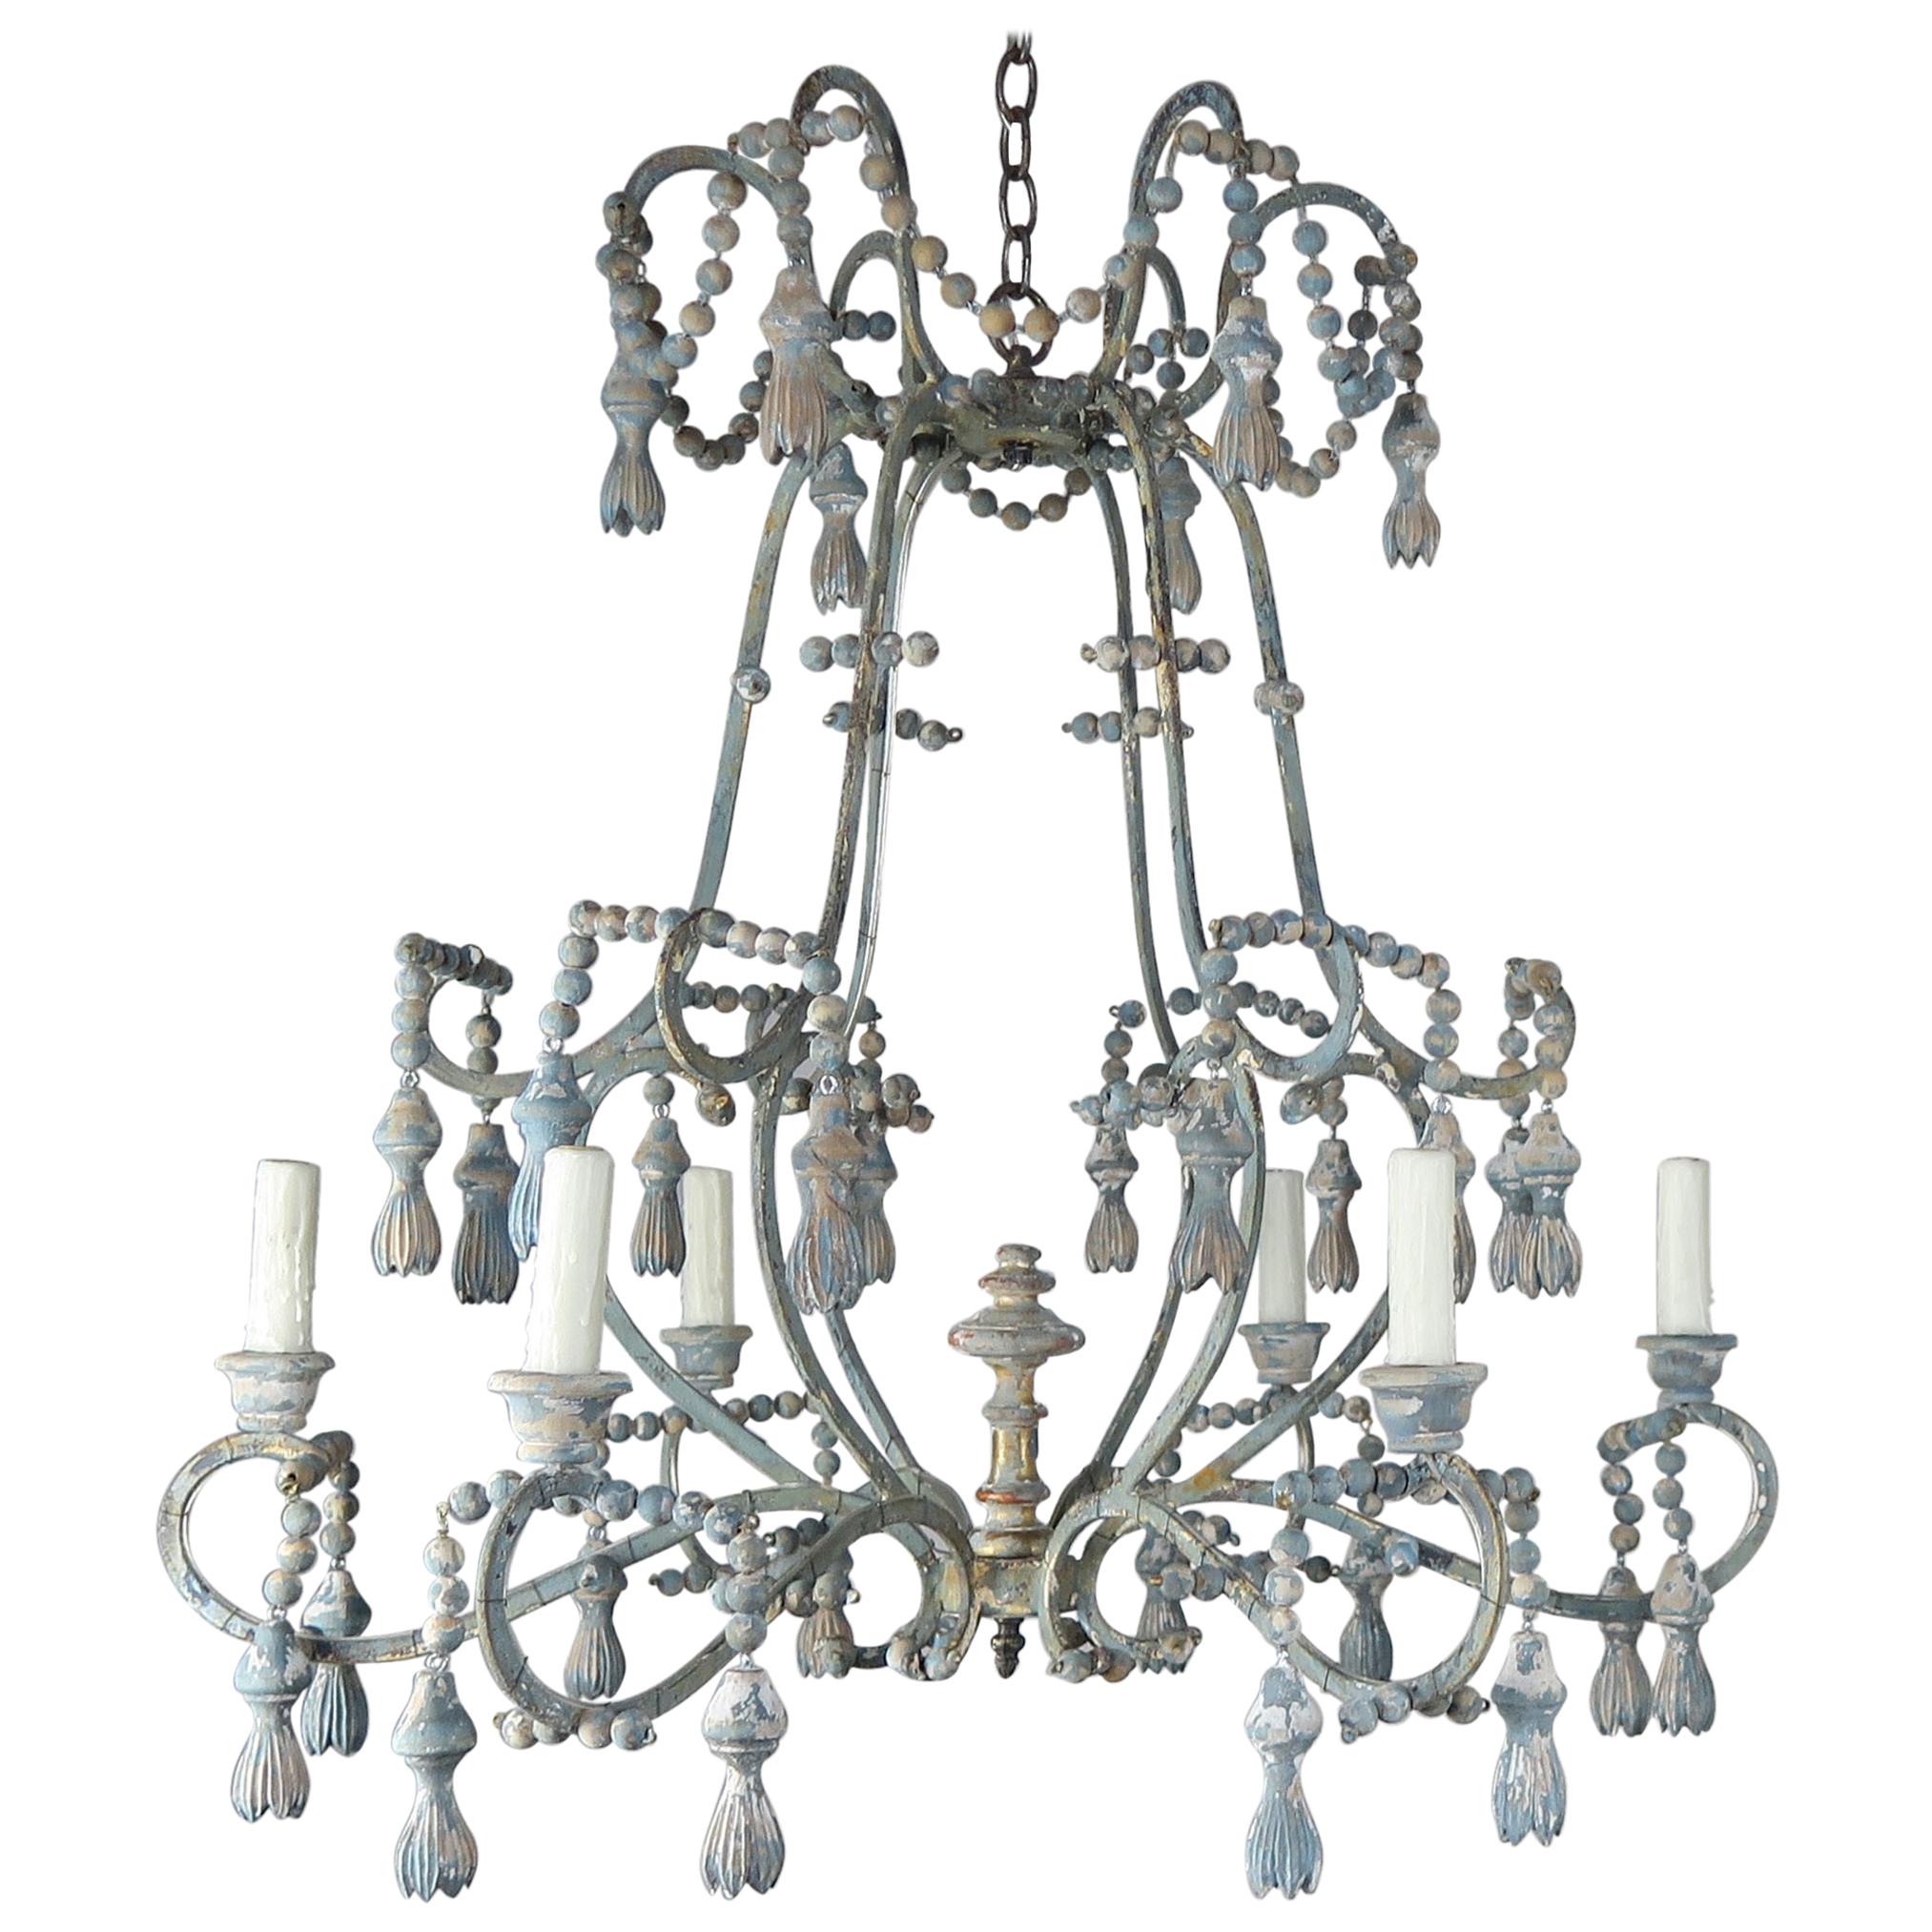 Italian Painted Six Light Iron and Wood Chandelier with Tassels